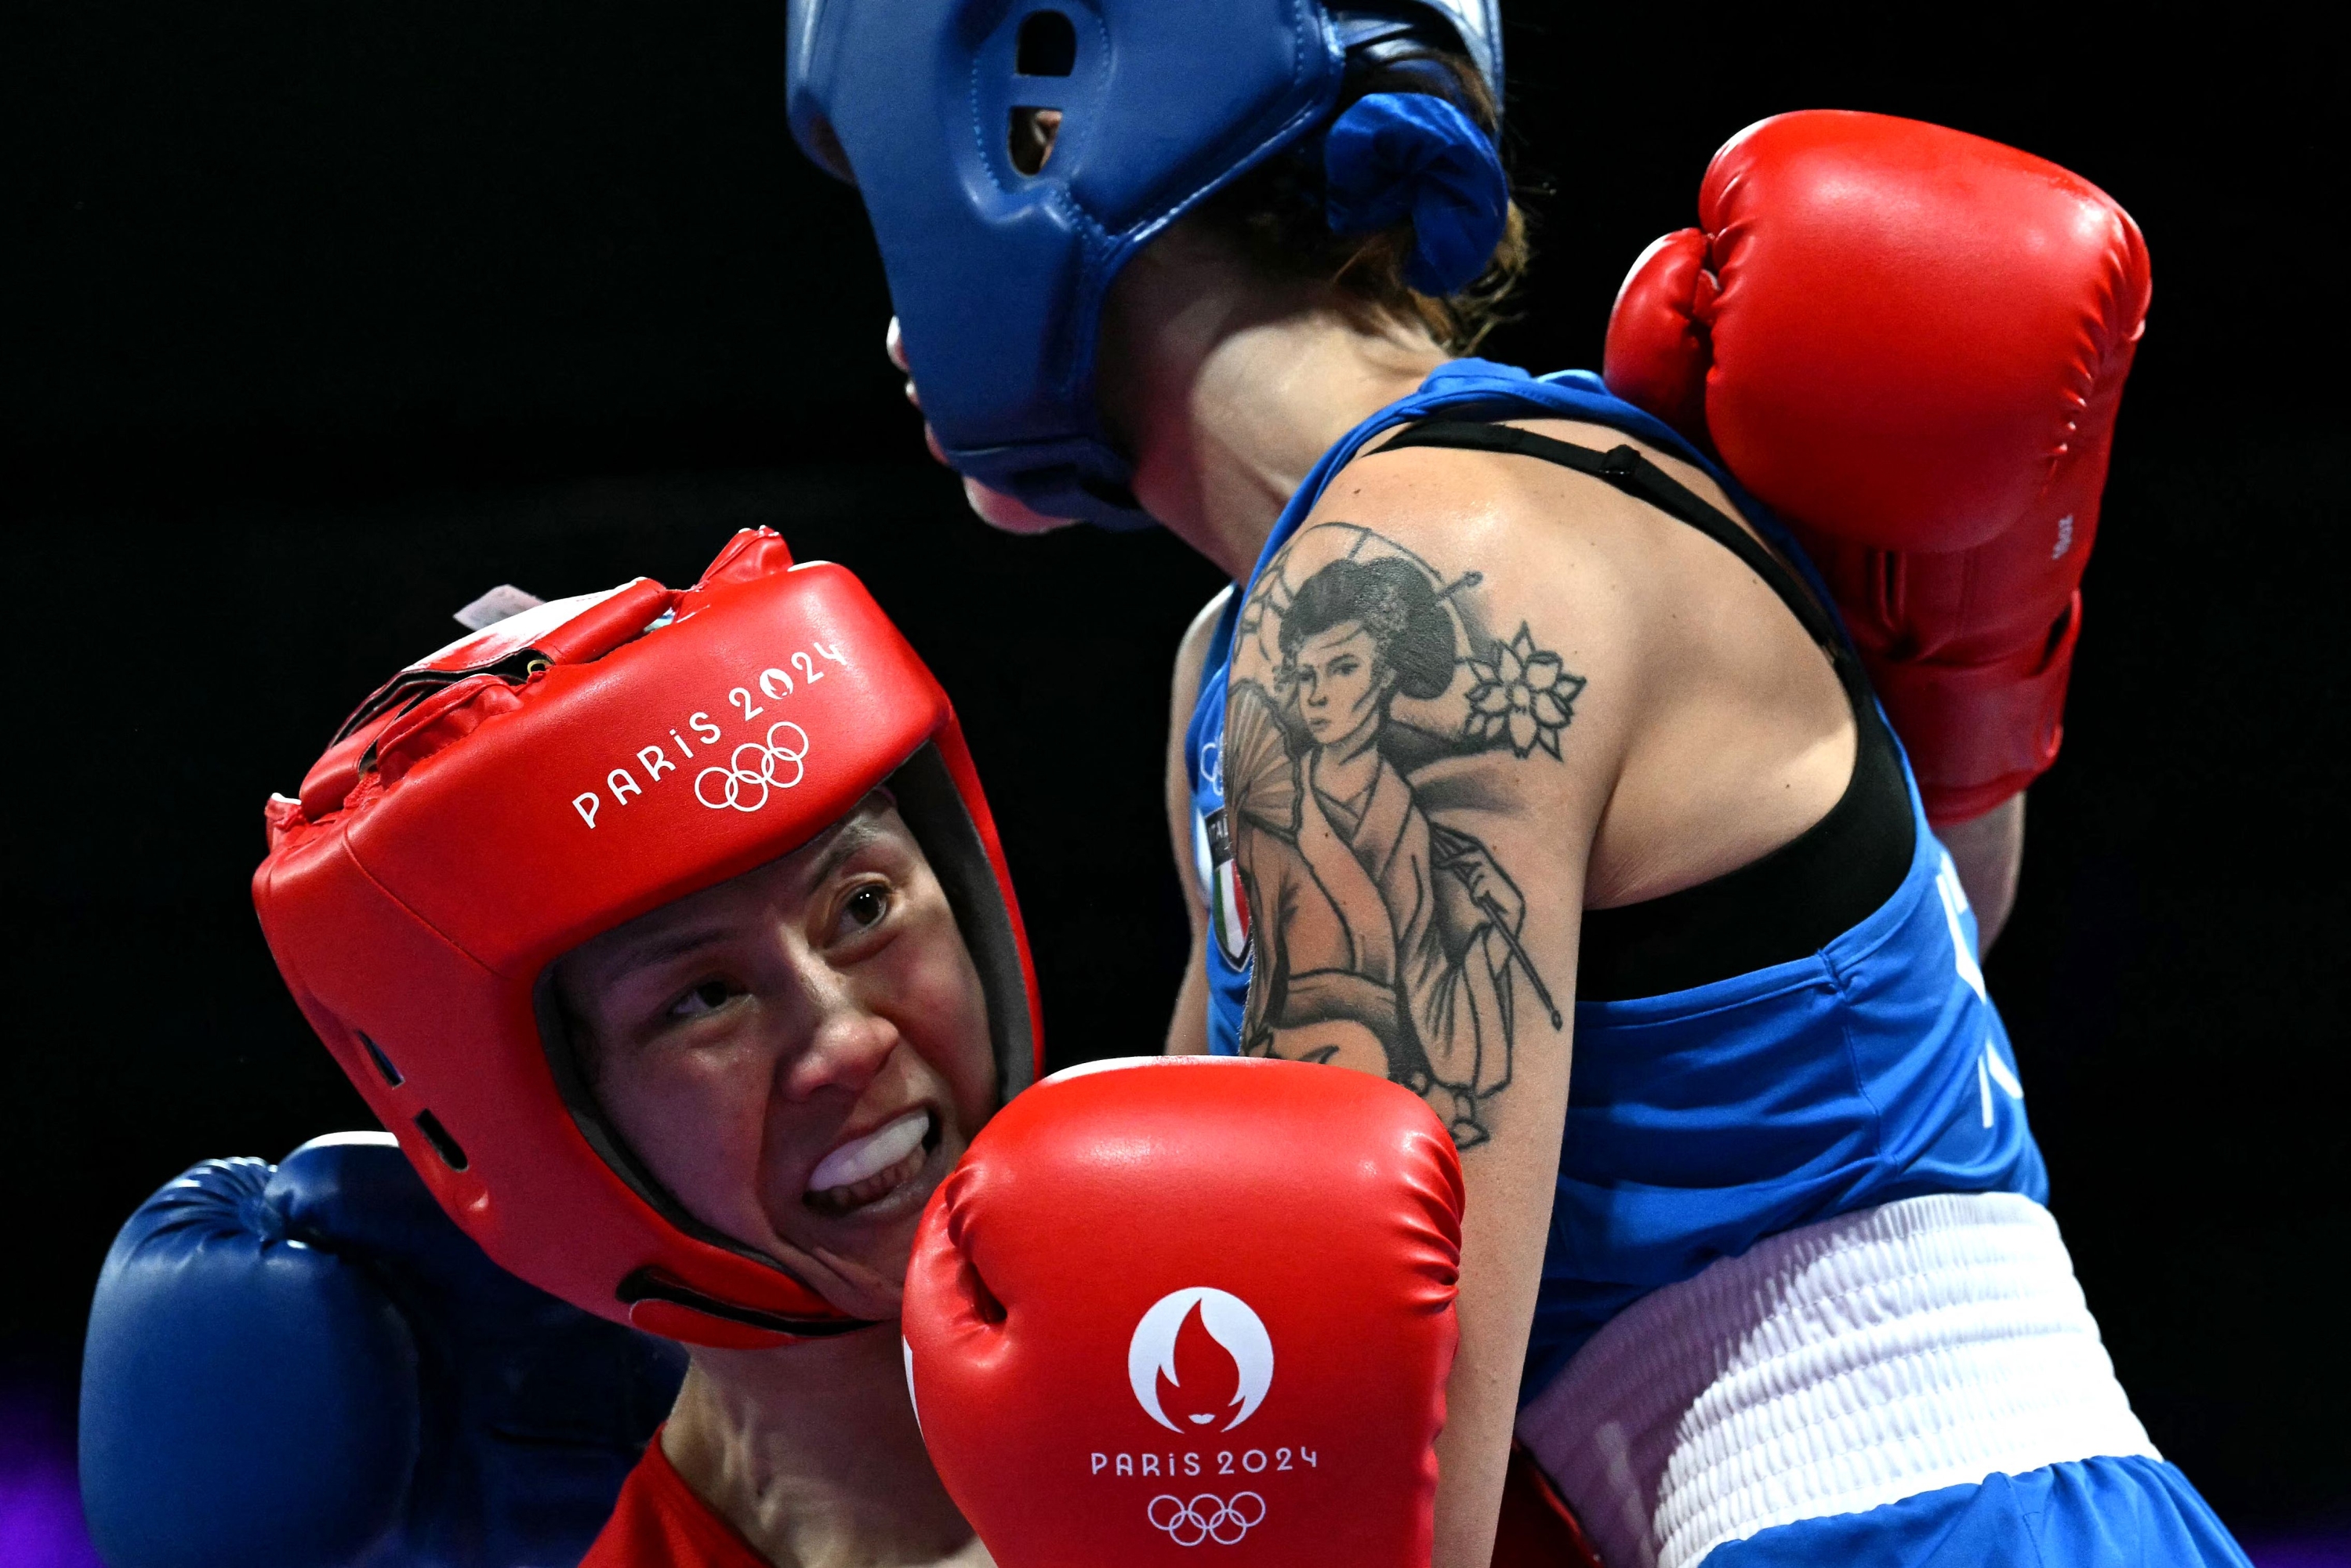 Italy's Irma Testa (in blue) fights against China's Zichun Xu in the women's 57kg preliminaries round of 32 boxing match during the Paris 2024 Olympic Games at the North Paris Arena, in Villepinte on July 30, 2024. (Photo by MOHD RASFAN / AFP)